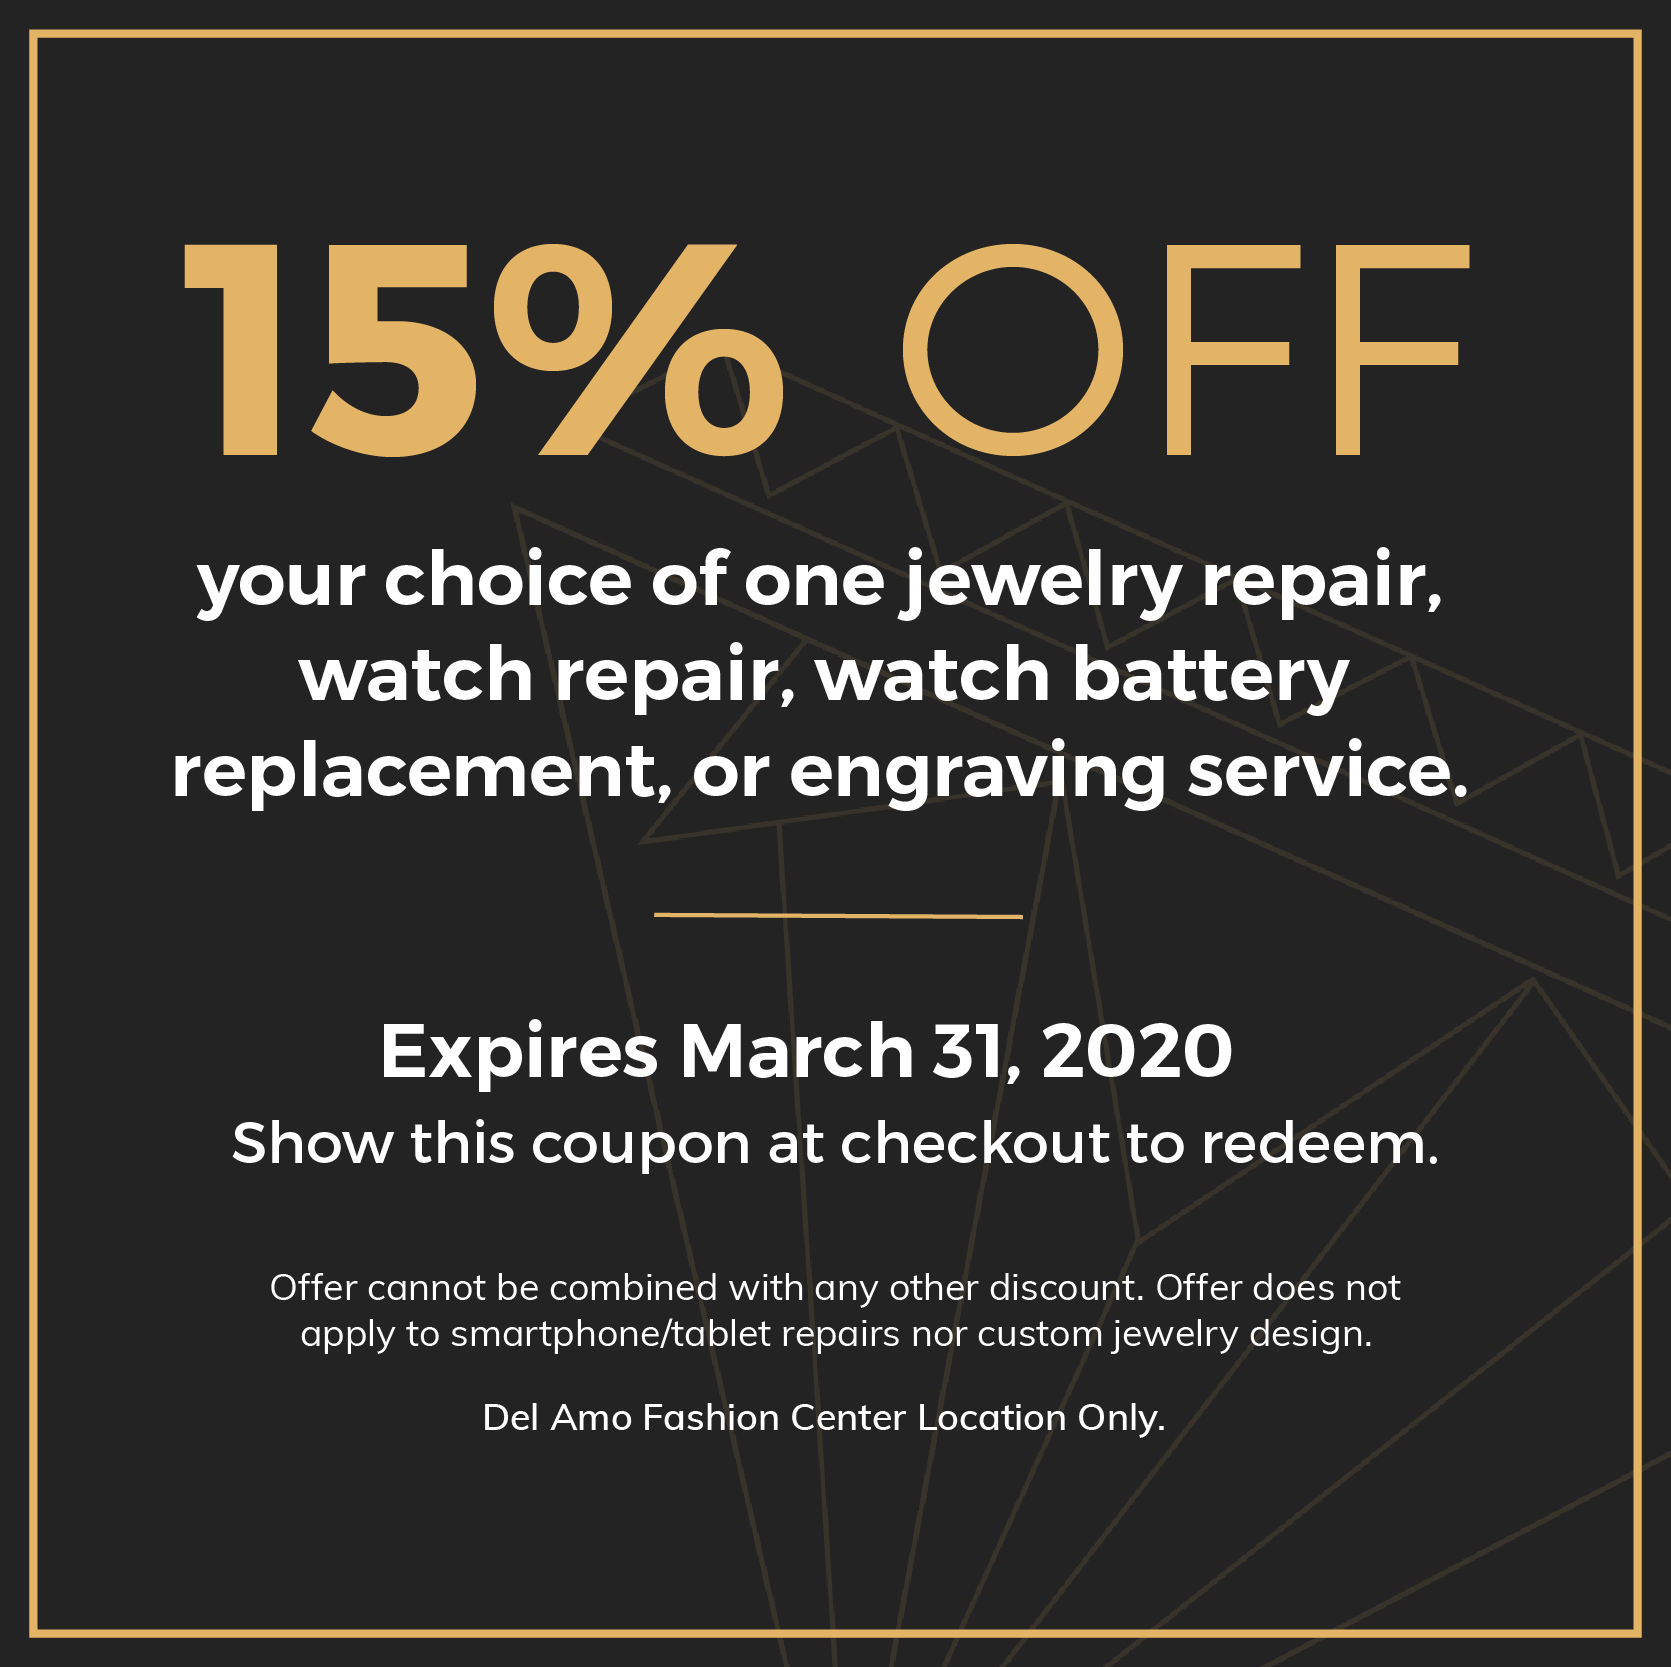 15% OFF. your choice of one jewelry repair, watch repair, watch battery replacement, or engraving service. Expires March 31, 2020. Show this coupon at checkout to redeem. Offer cannot be combined with any other discount. Offer does not apply to smartphone/tablet repairs nor custom jewelry design. Del Amo Fashion Center Location Only.